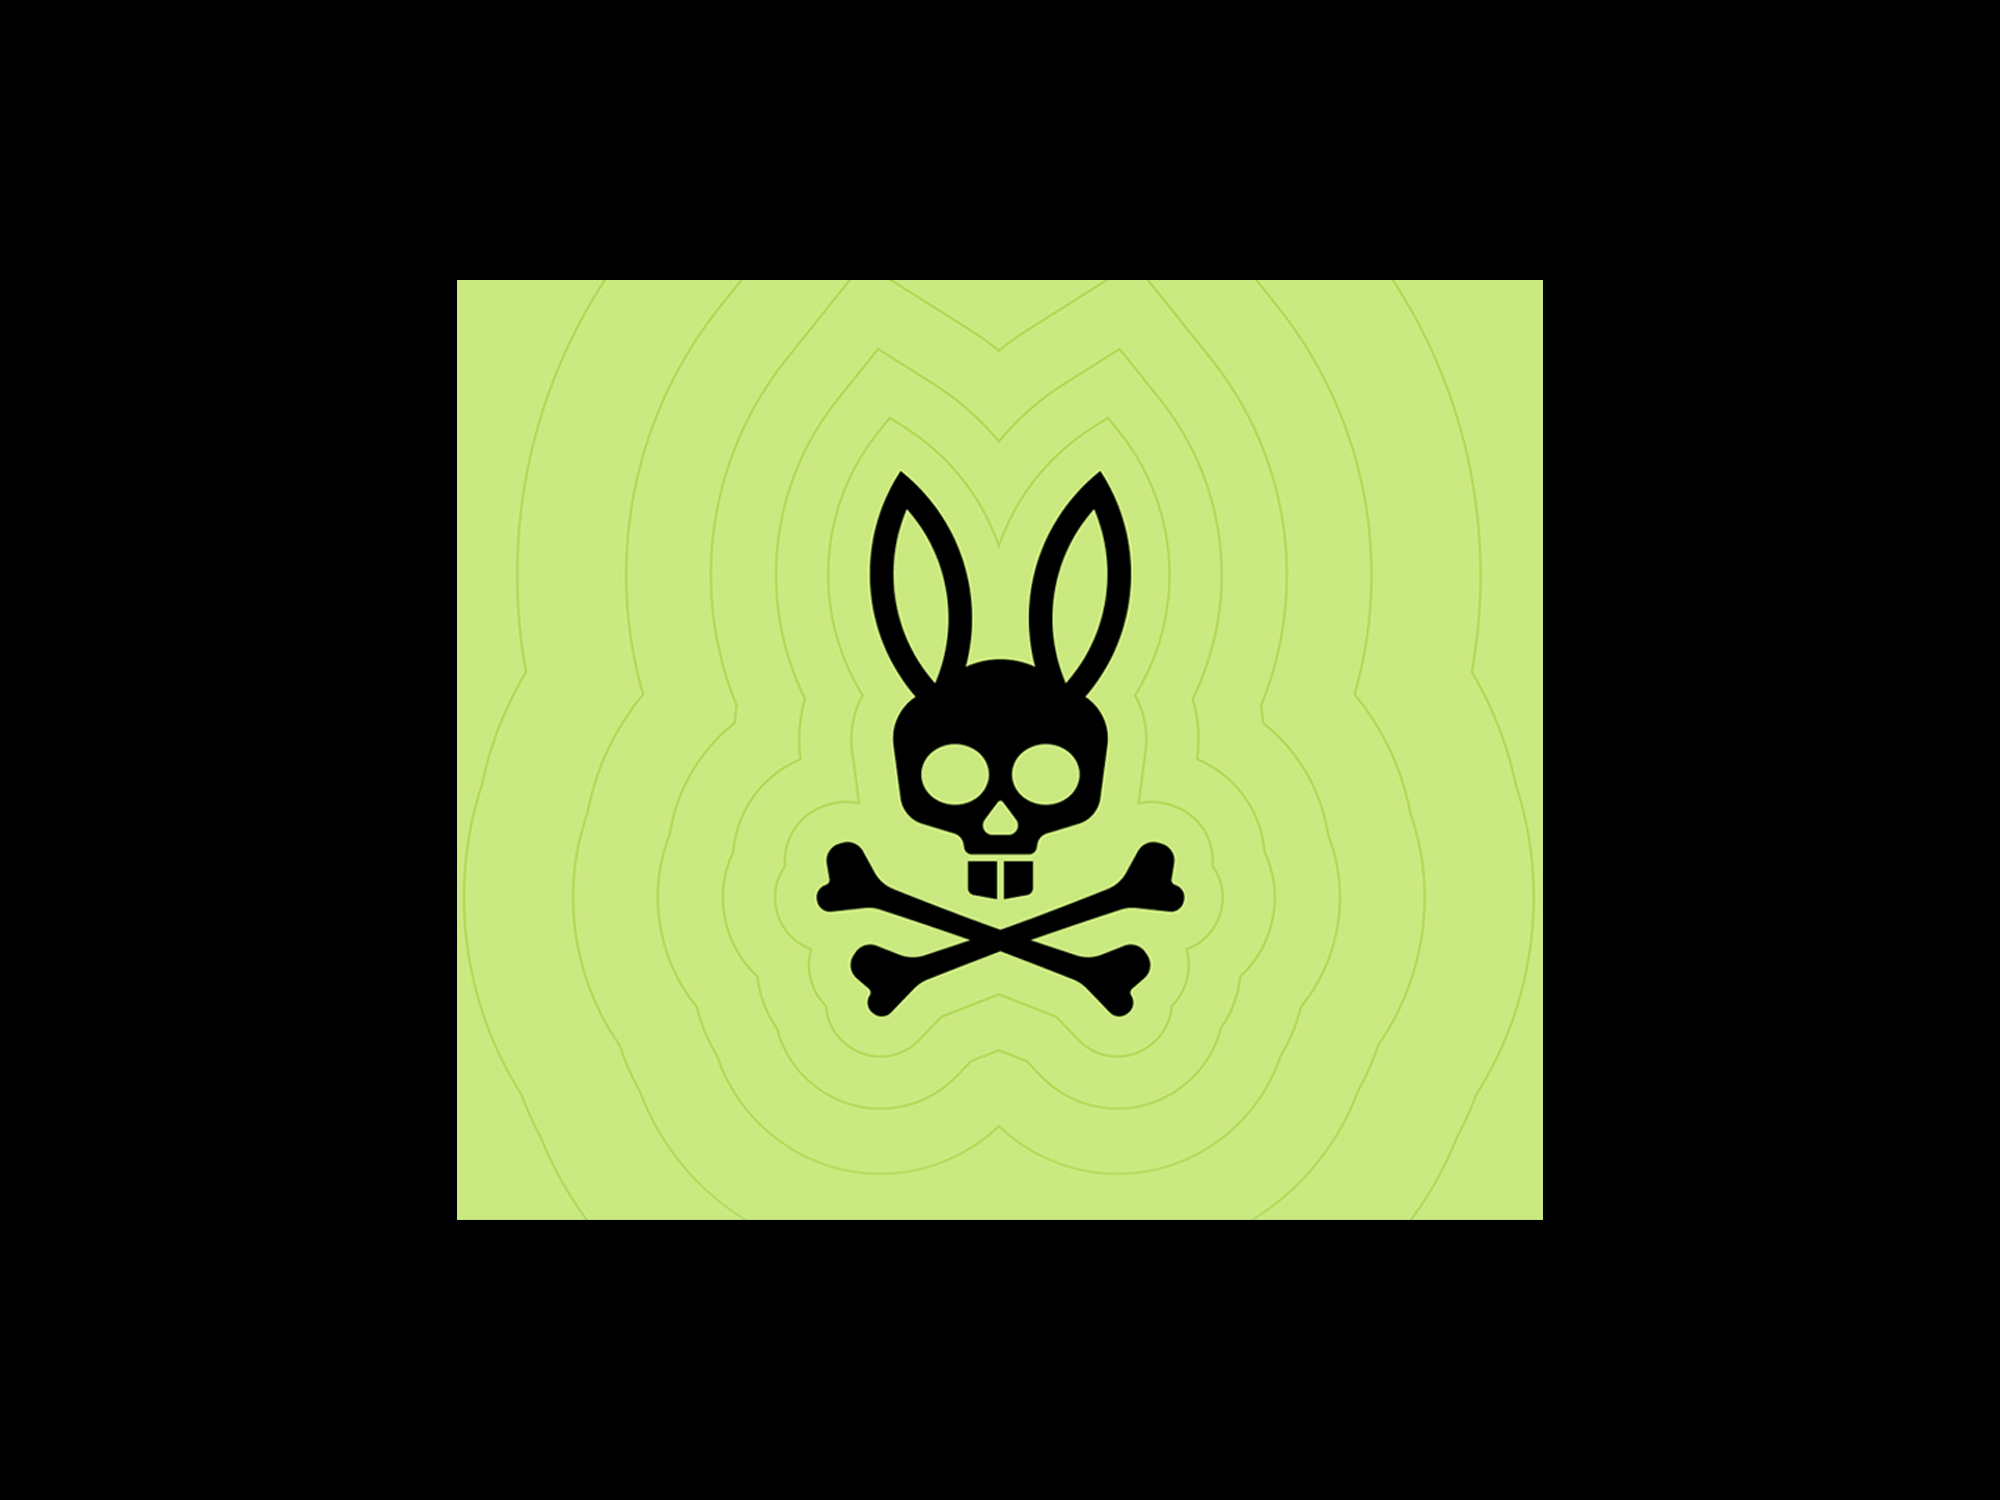 Psycho Bunny Animation animation branding design ecommerce fashion graphic design green layout lime menswear